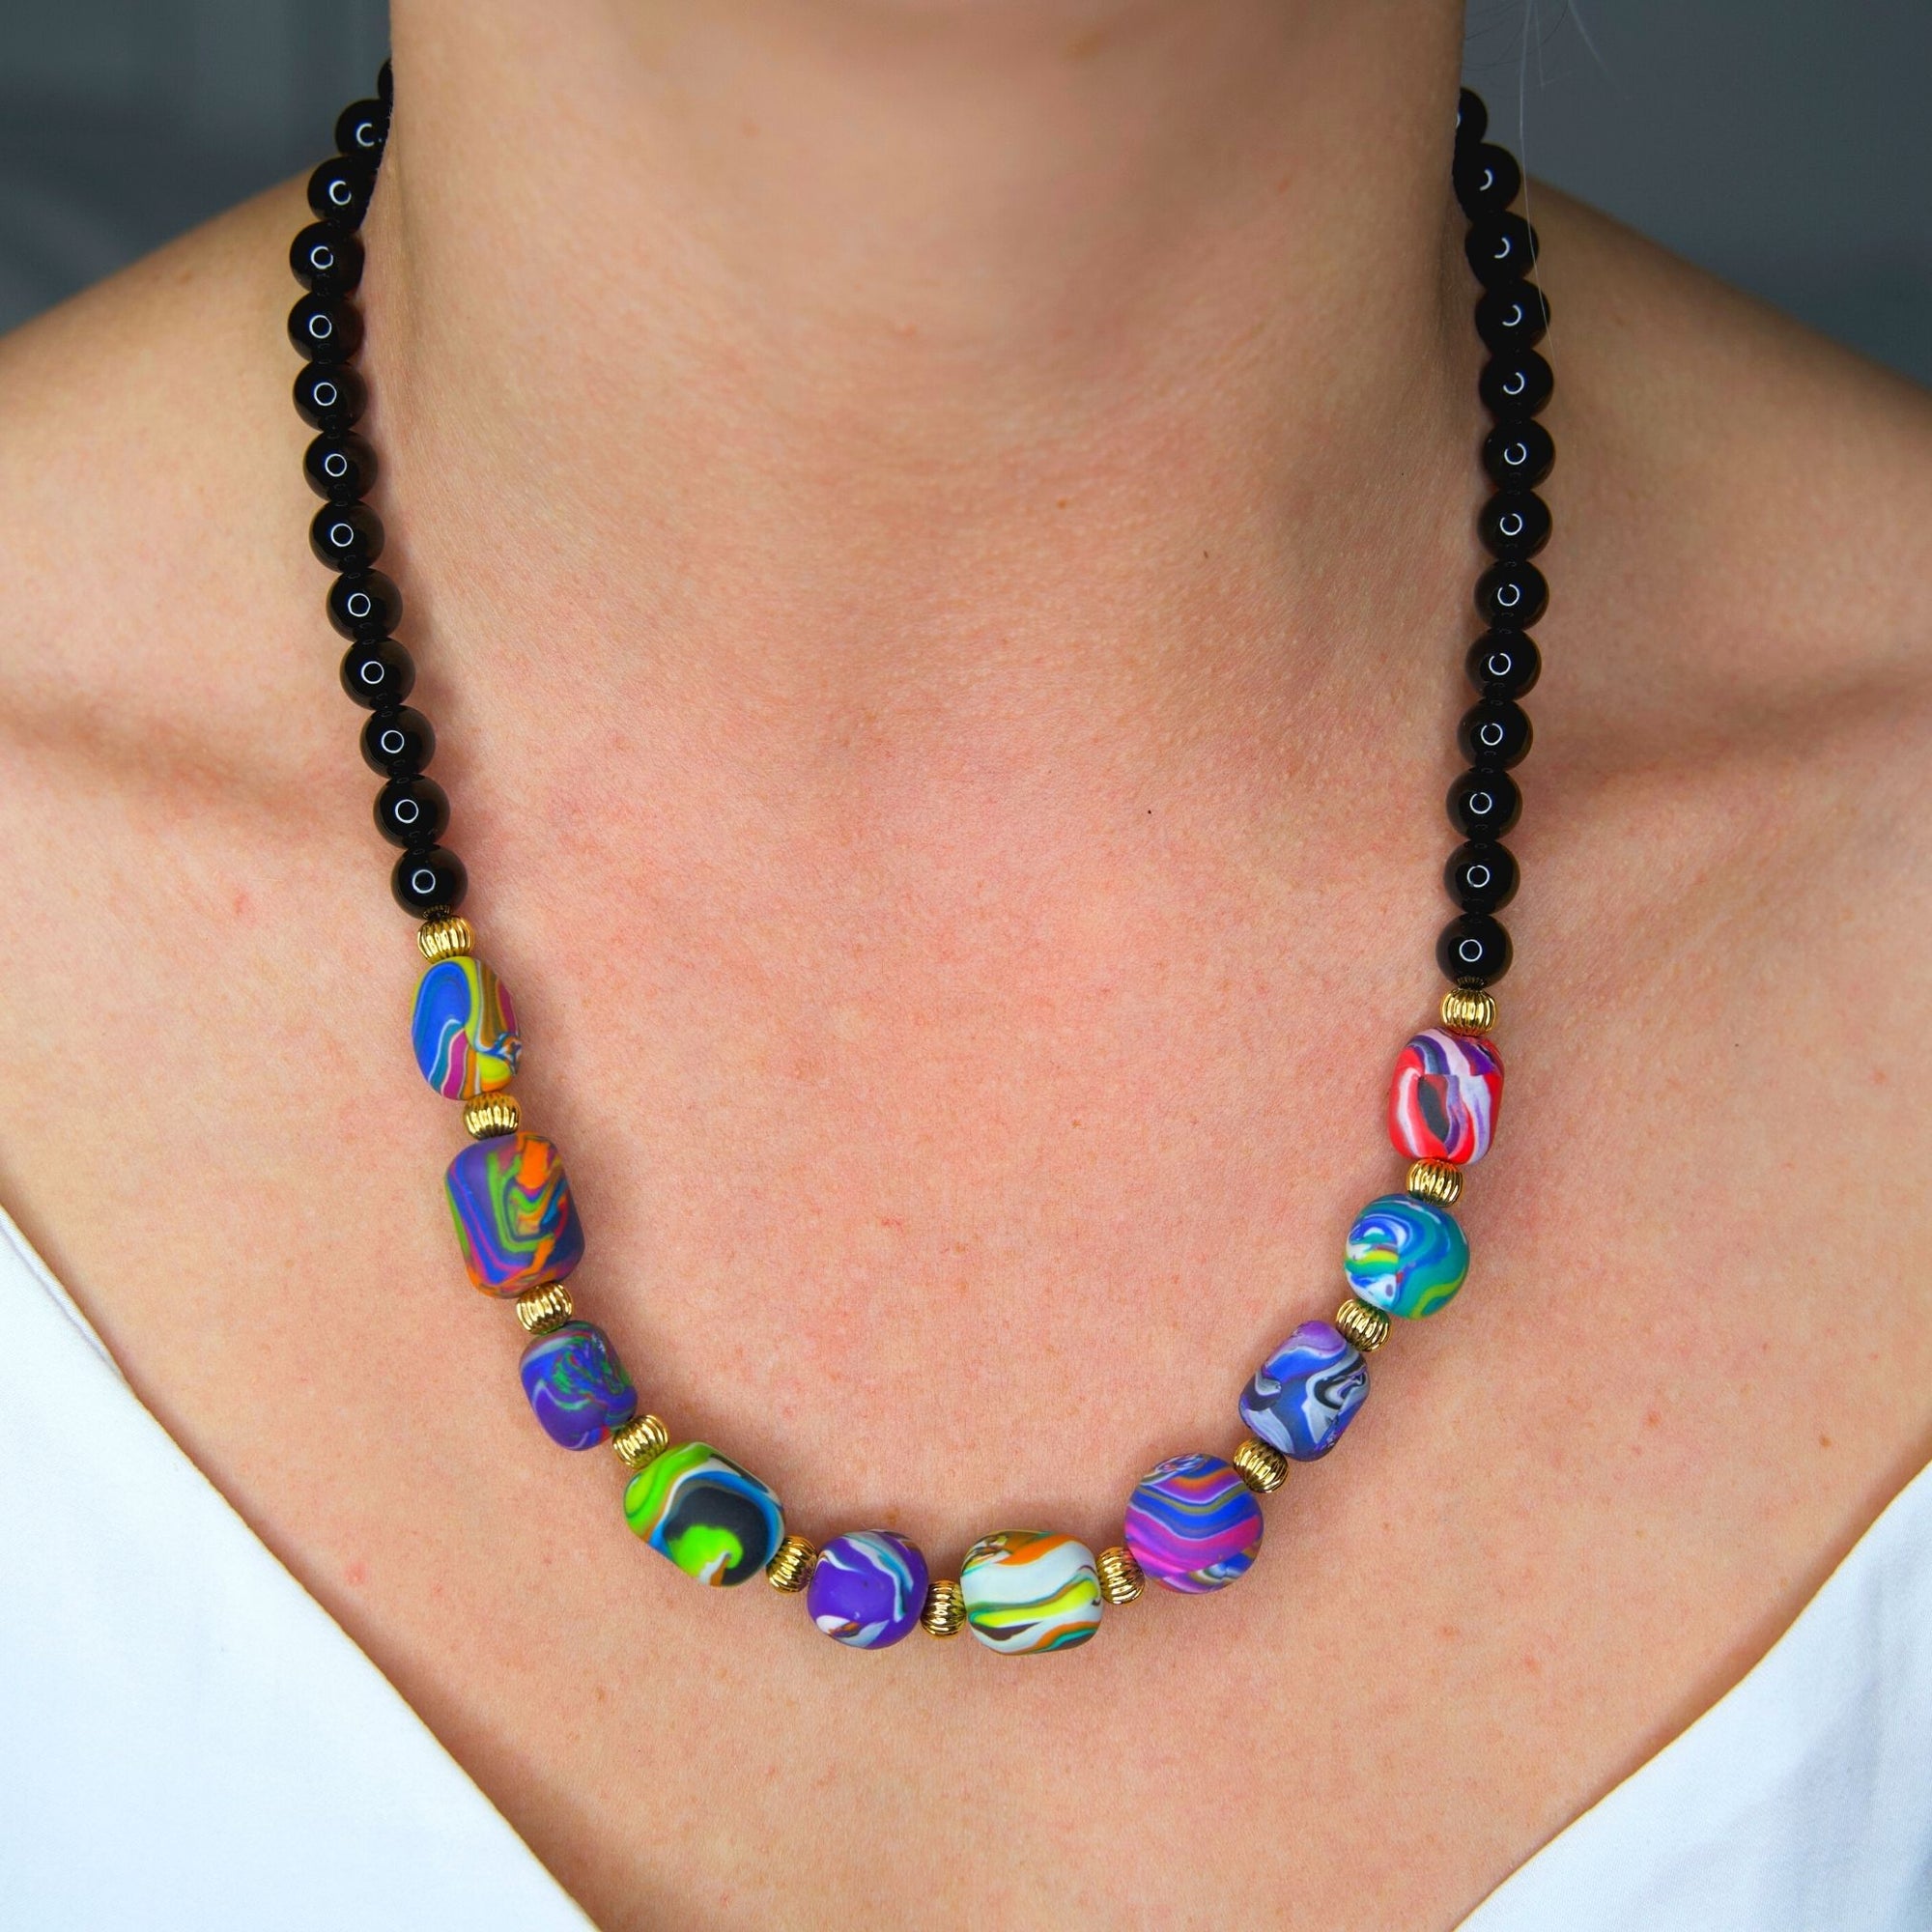 One of a Kind Necklace | Handmade Multi-coloured Beads | Black Onyx | 14kt Gold Filled Clasp | BONLMC300